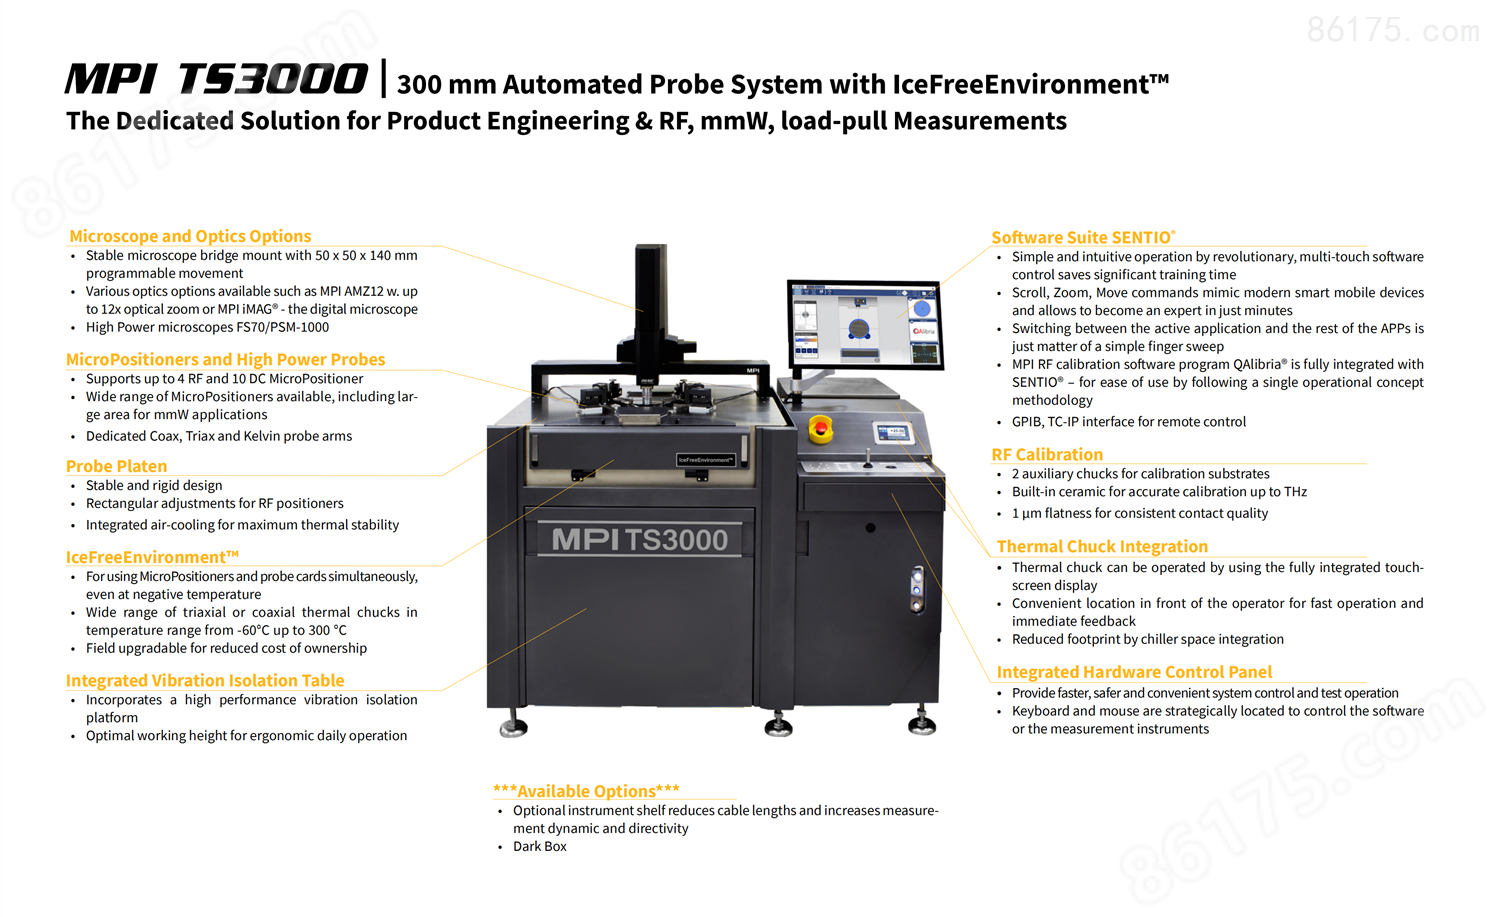 MPI-TS3000-Automated-Probe-System-Fact-Sheet_00.png